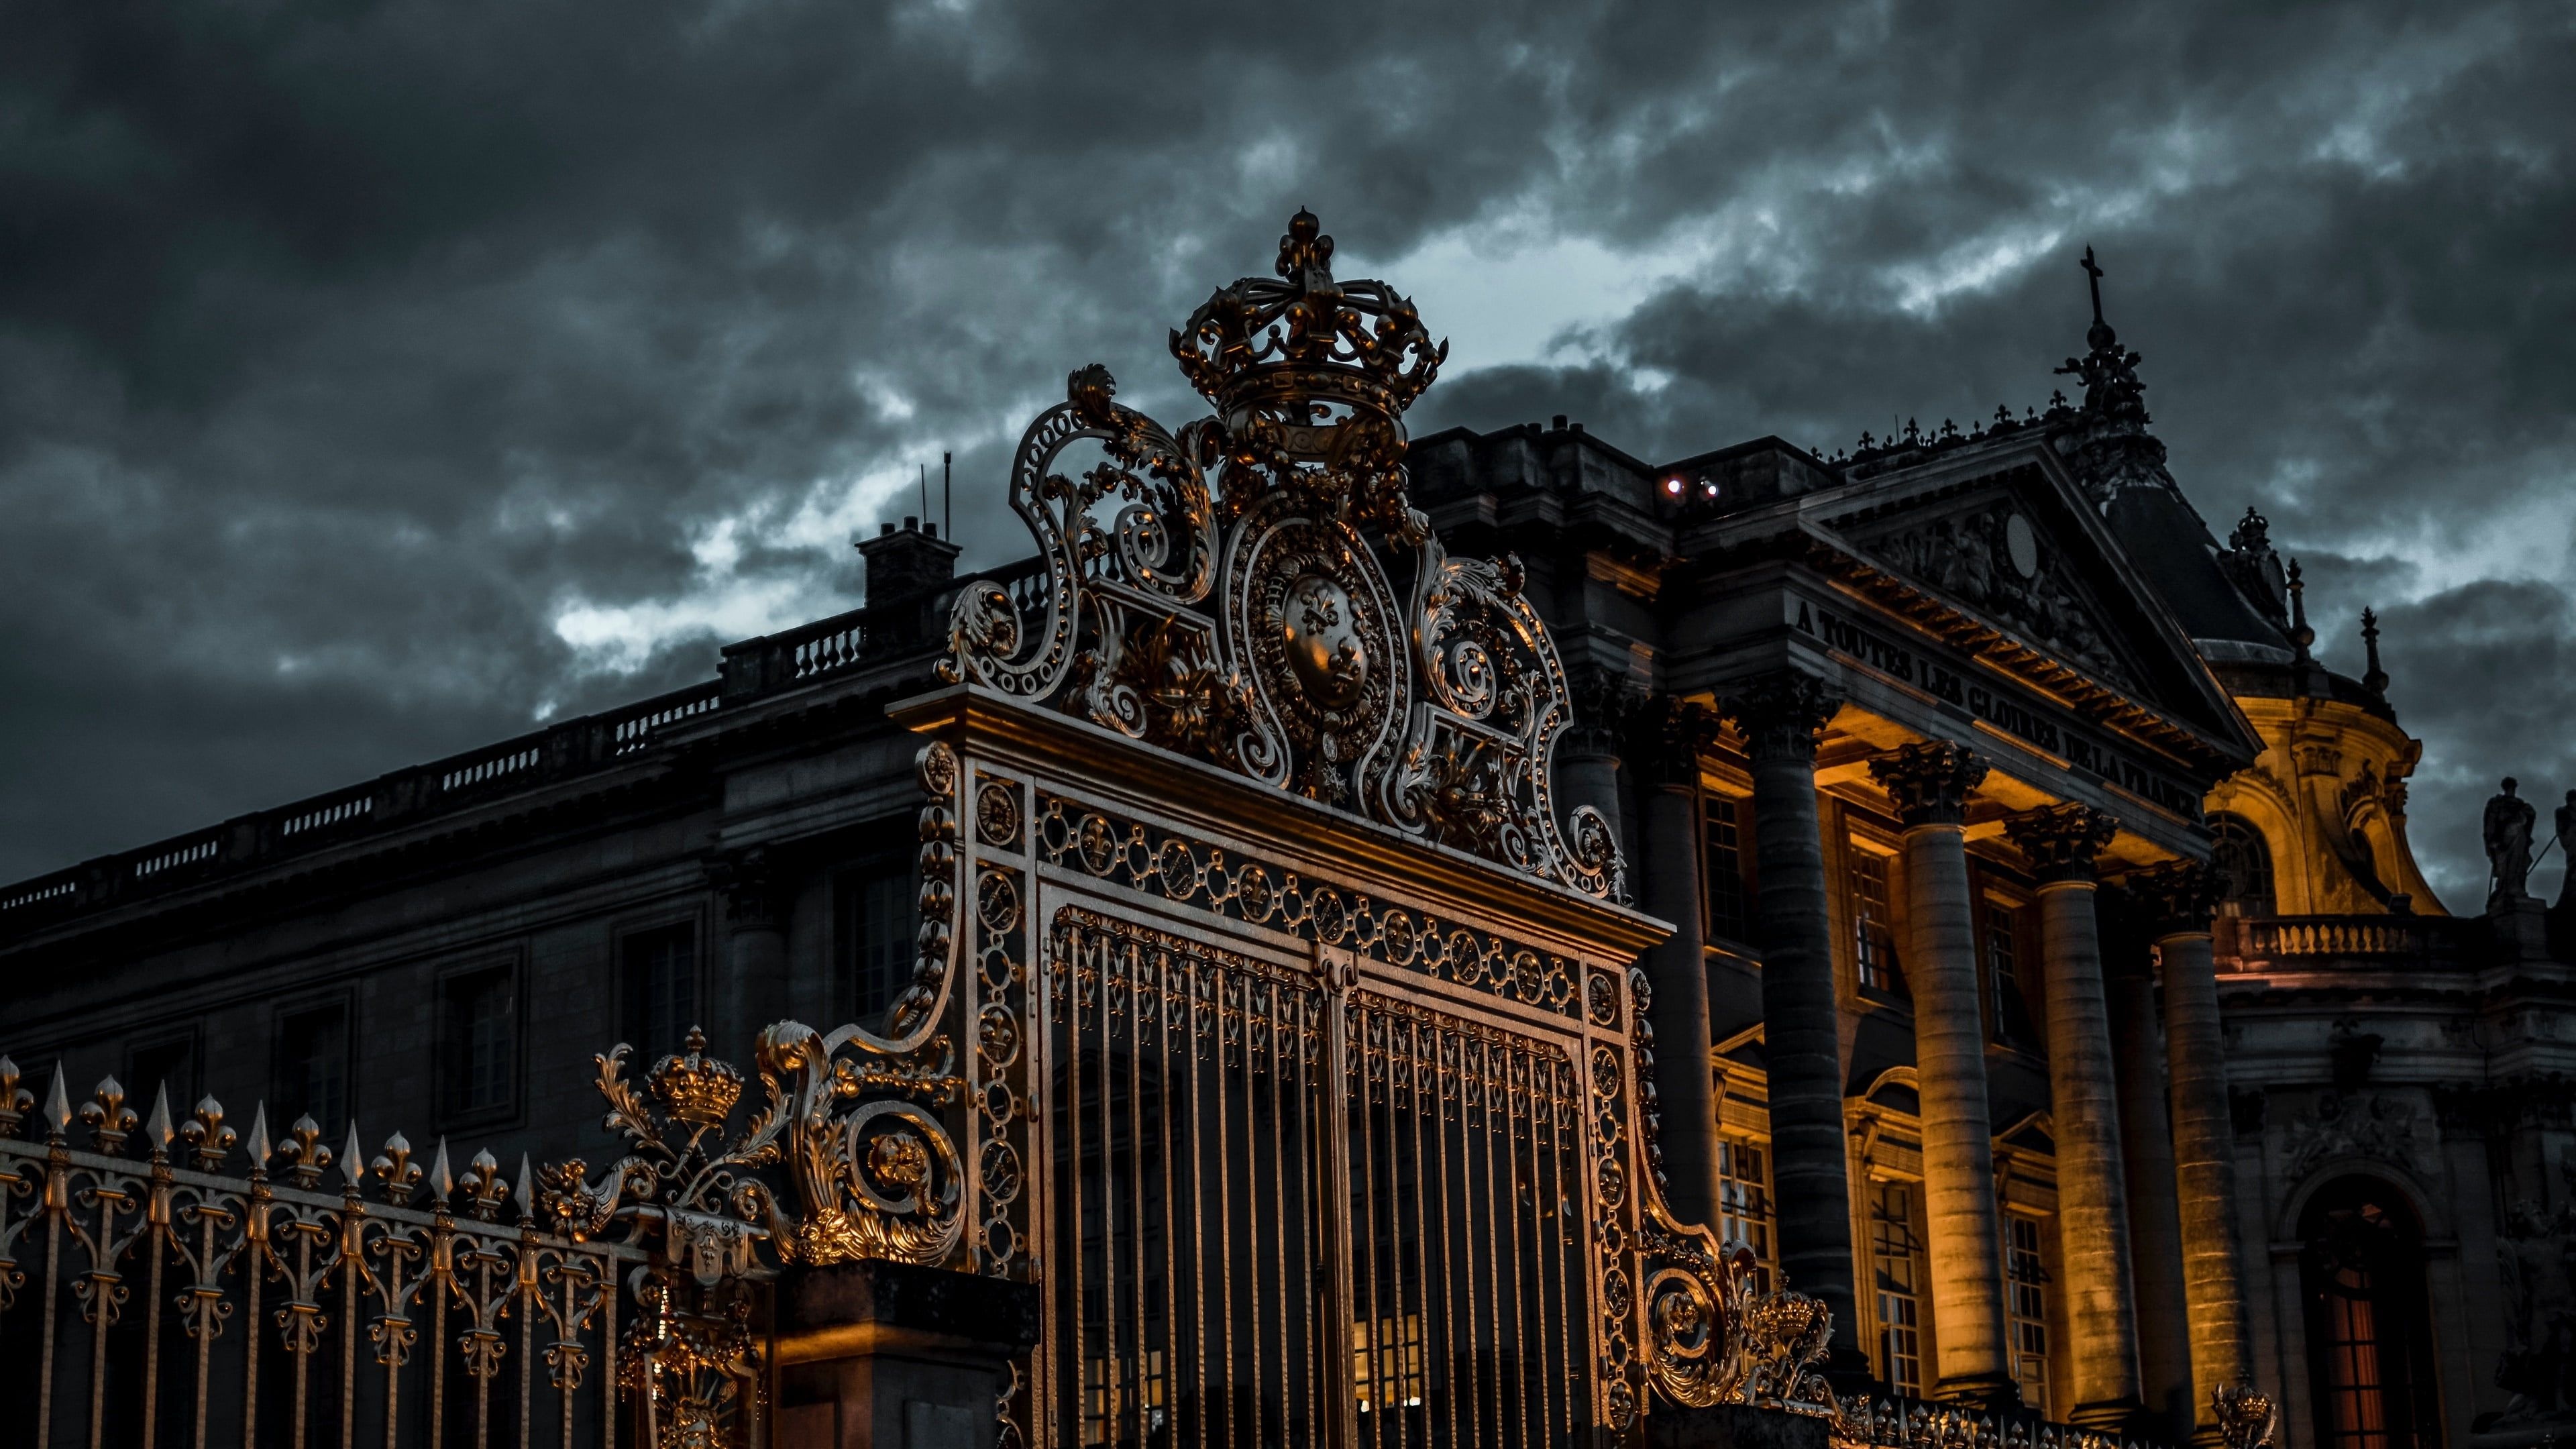 Cloudy sky, Versailles gate, Darkness architecture, Small group travel, 3840x2160 4K Desktop